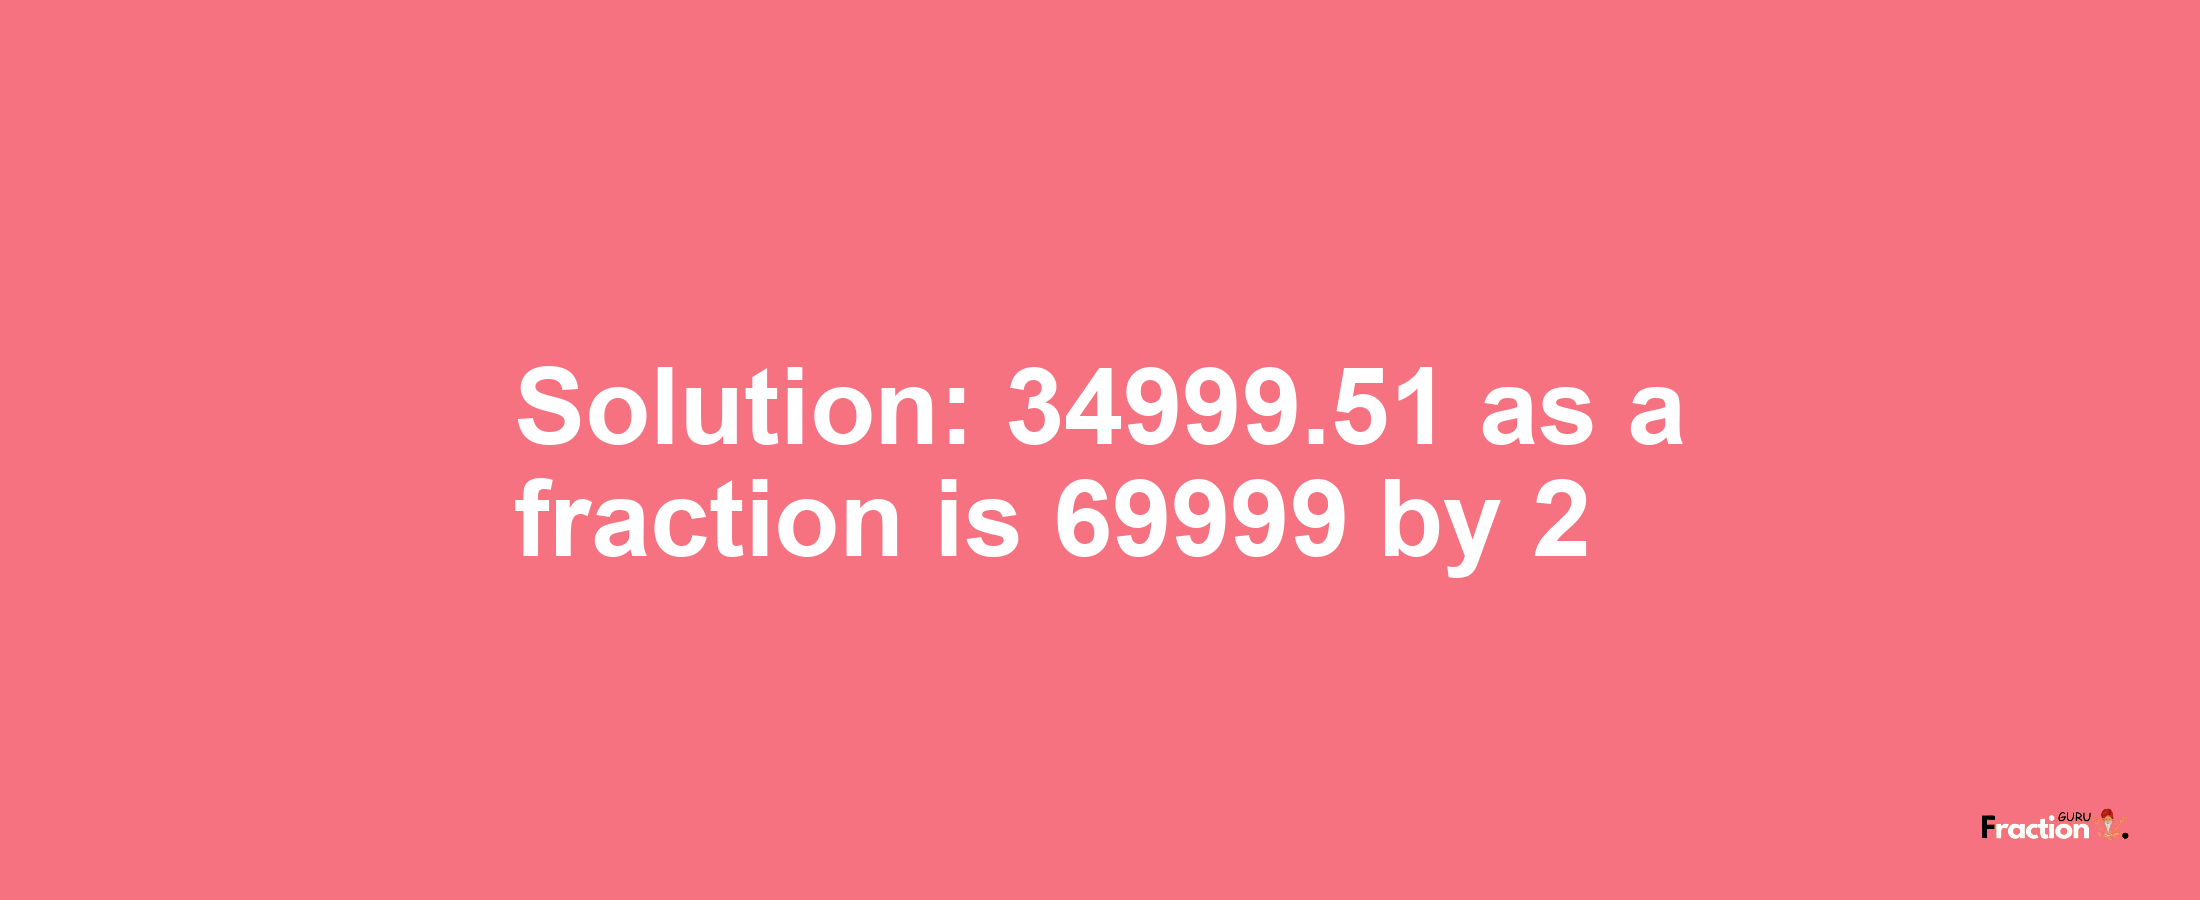 Solution:34999.51 as a fraction is 69999/2